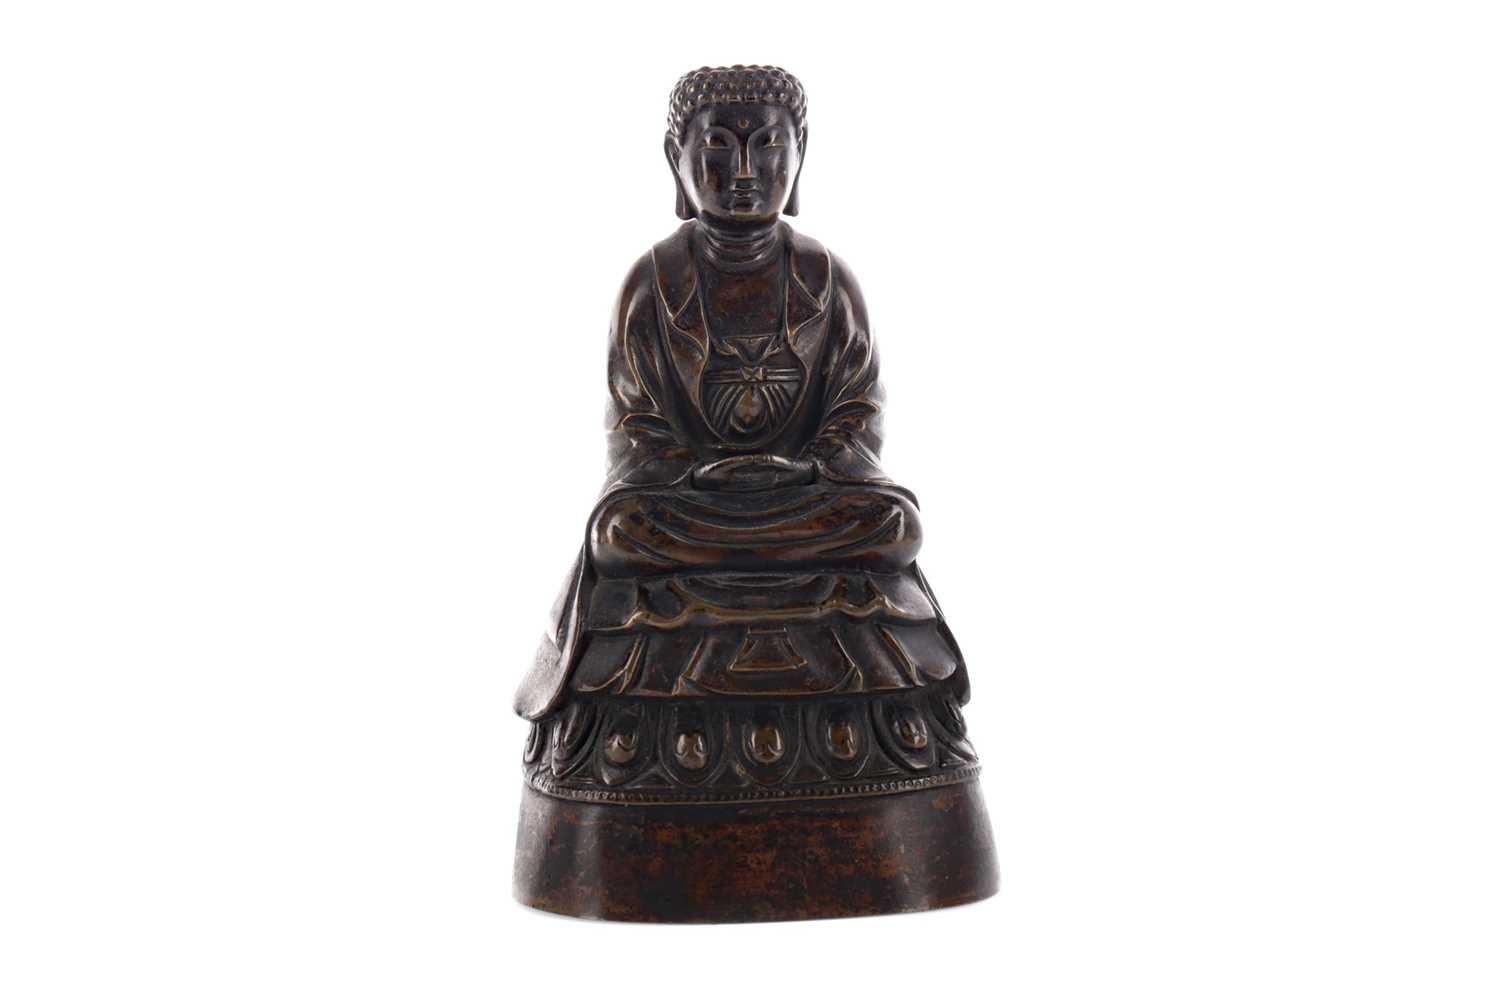 Lot 329 - AN EARLY 20TH CENTURY CHINESE BRONZE FIGURE OF A BUDDHA